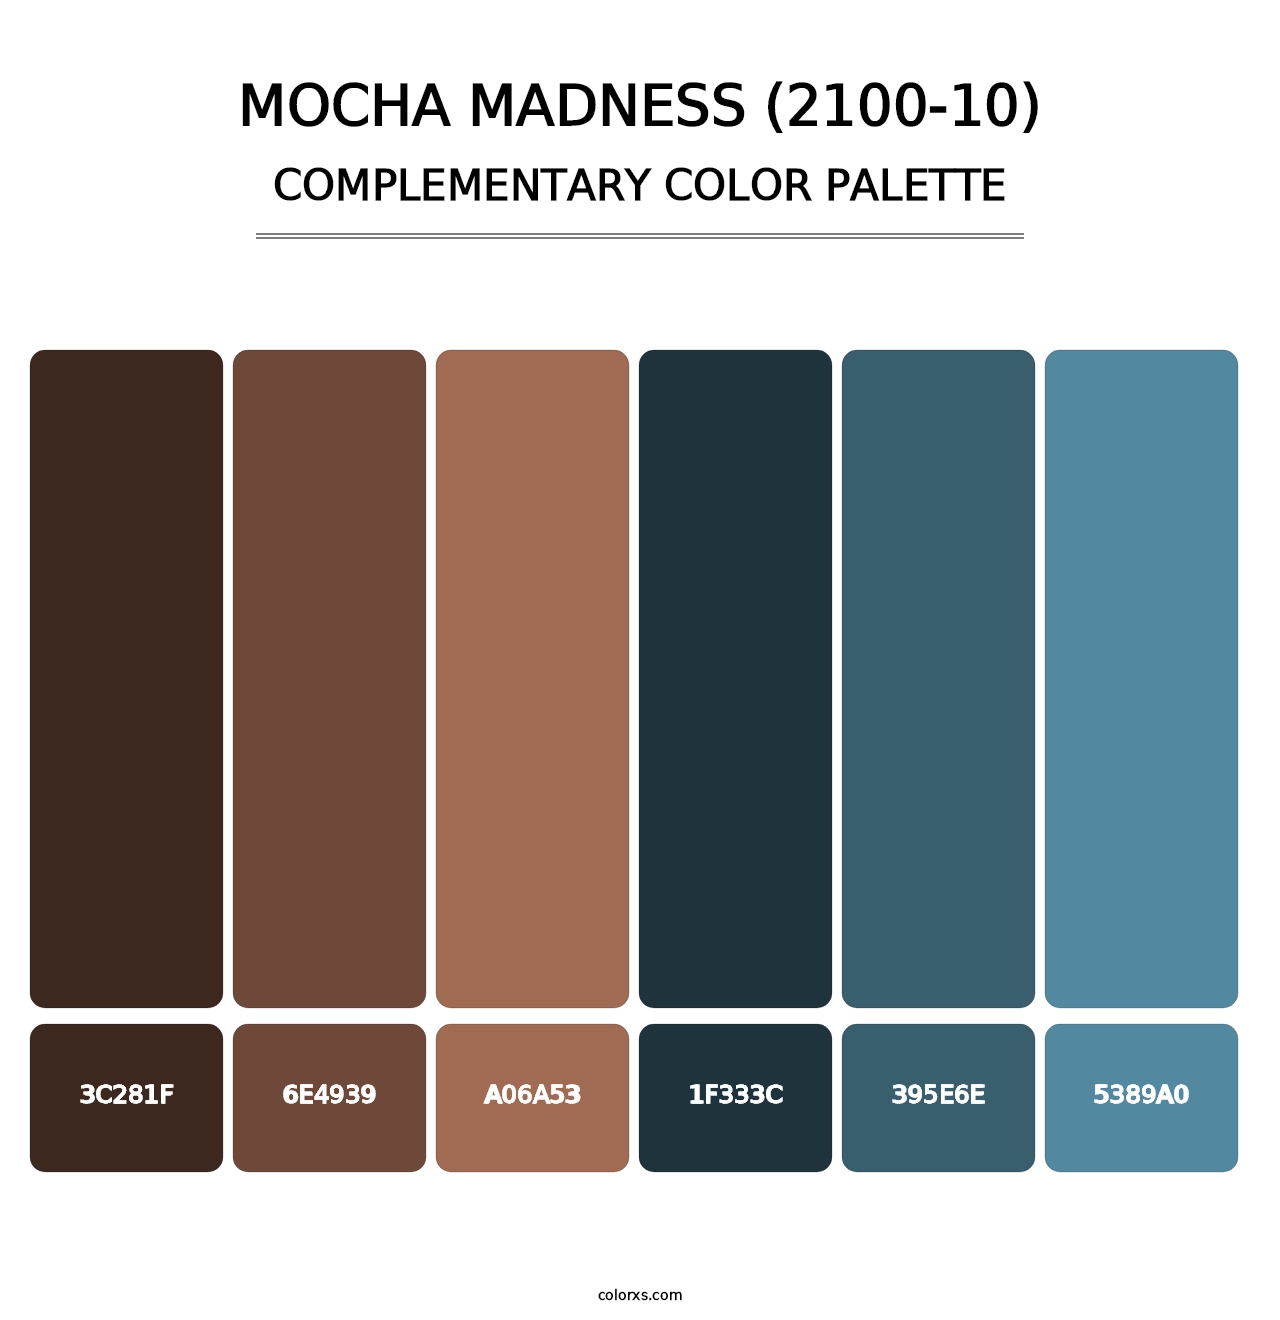 Mocha Madness (2100-10) - Complementary Color Palette